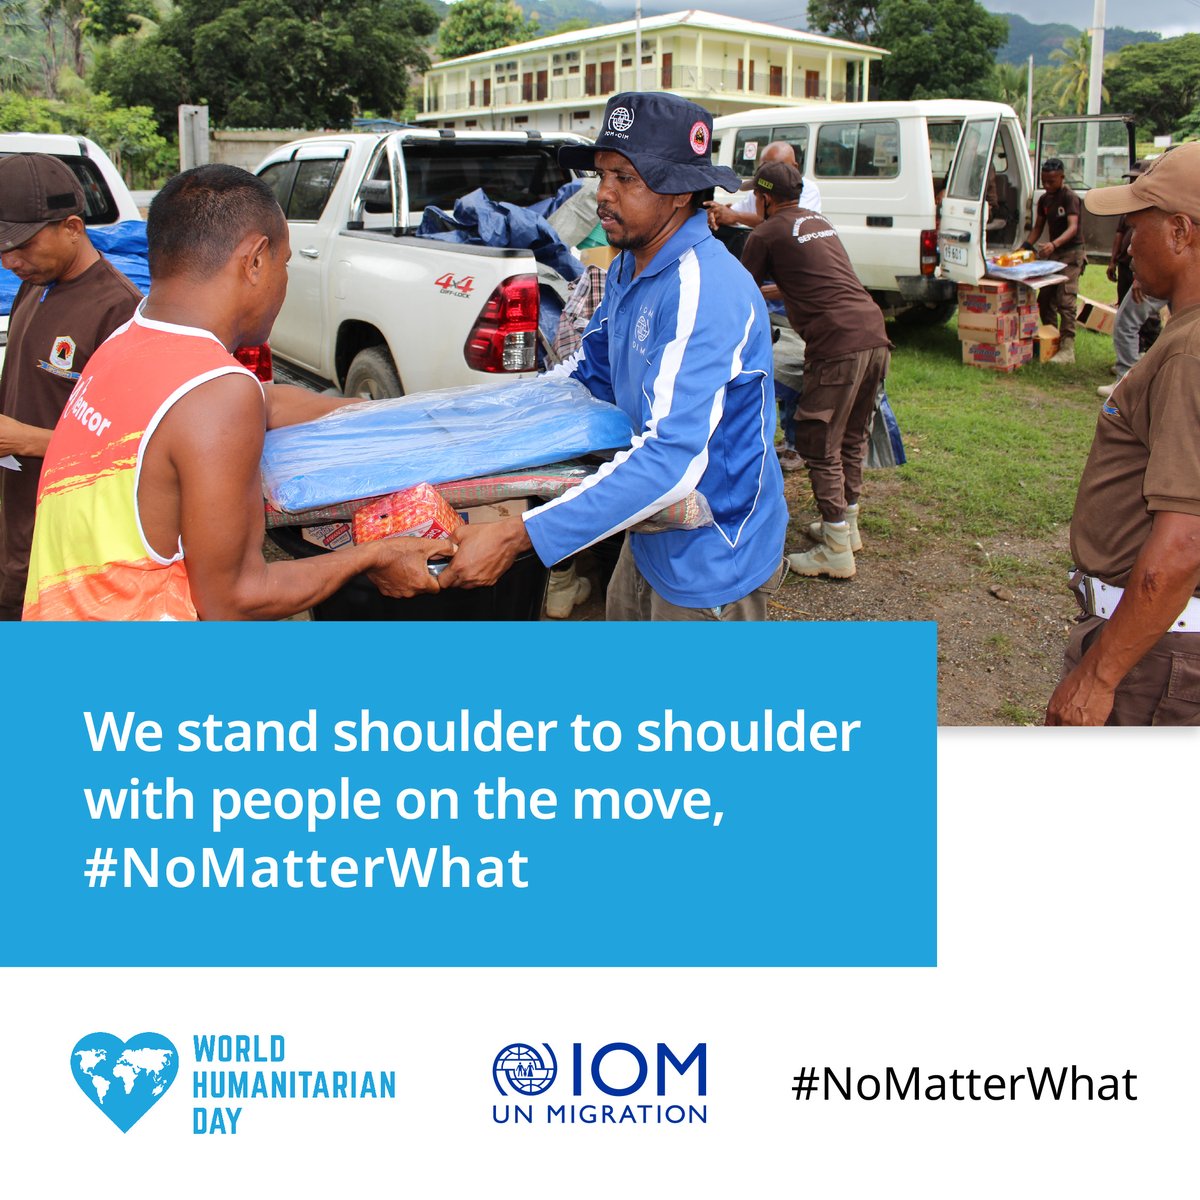 We stand shoulder to shoulder with people on the move, #NoMatterWhat